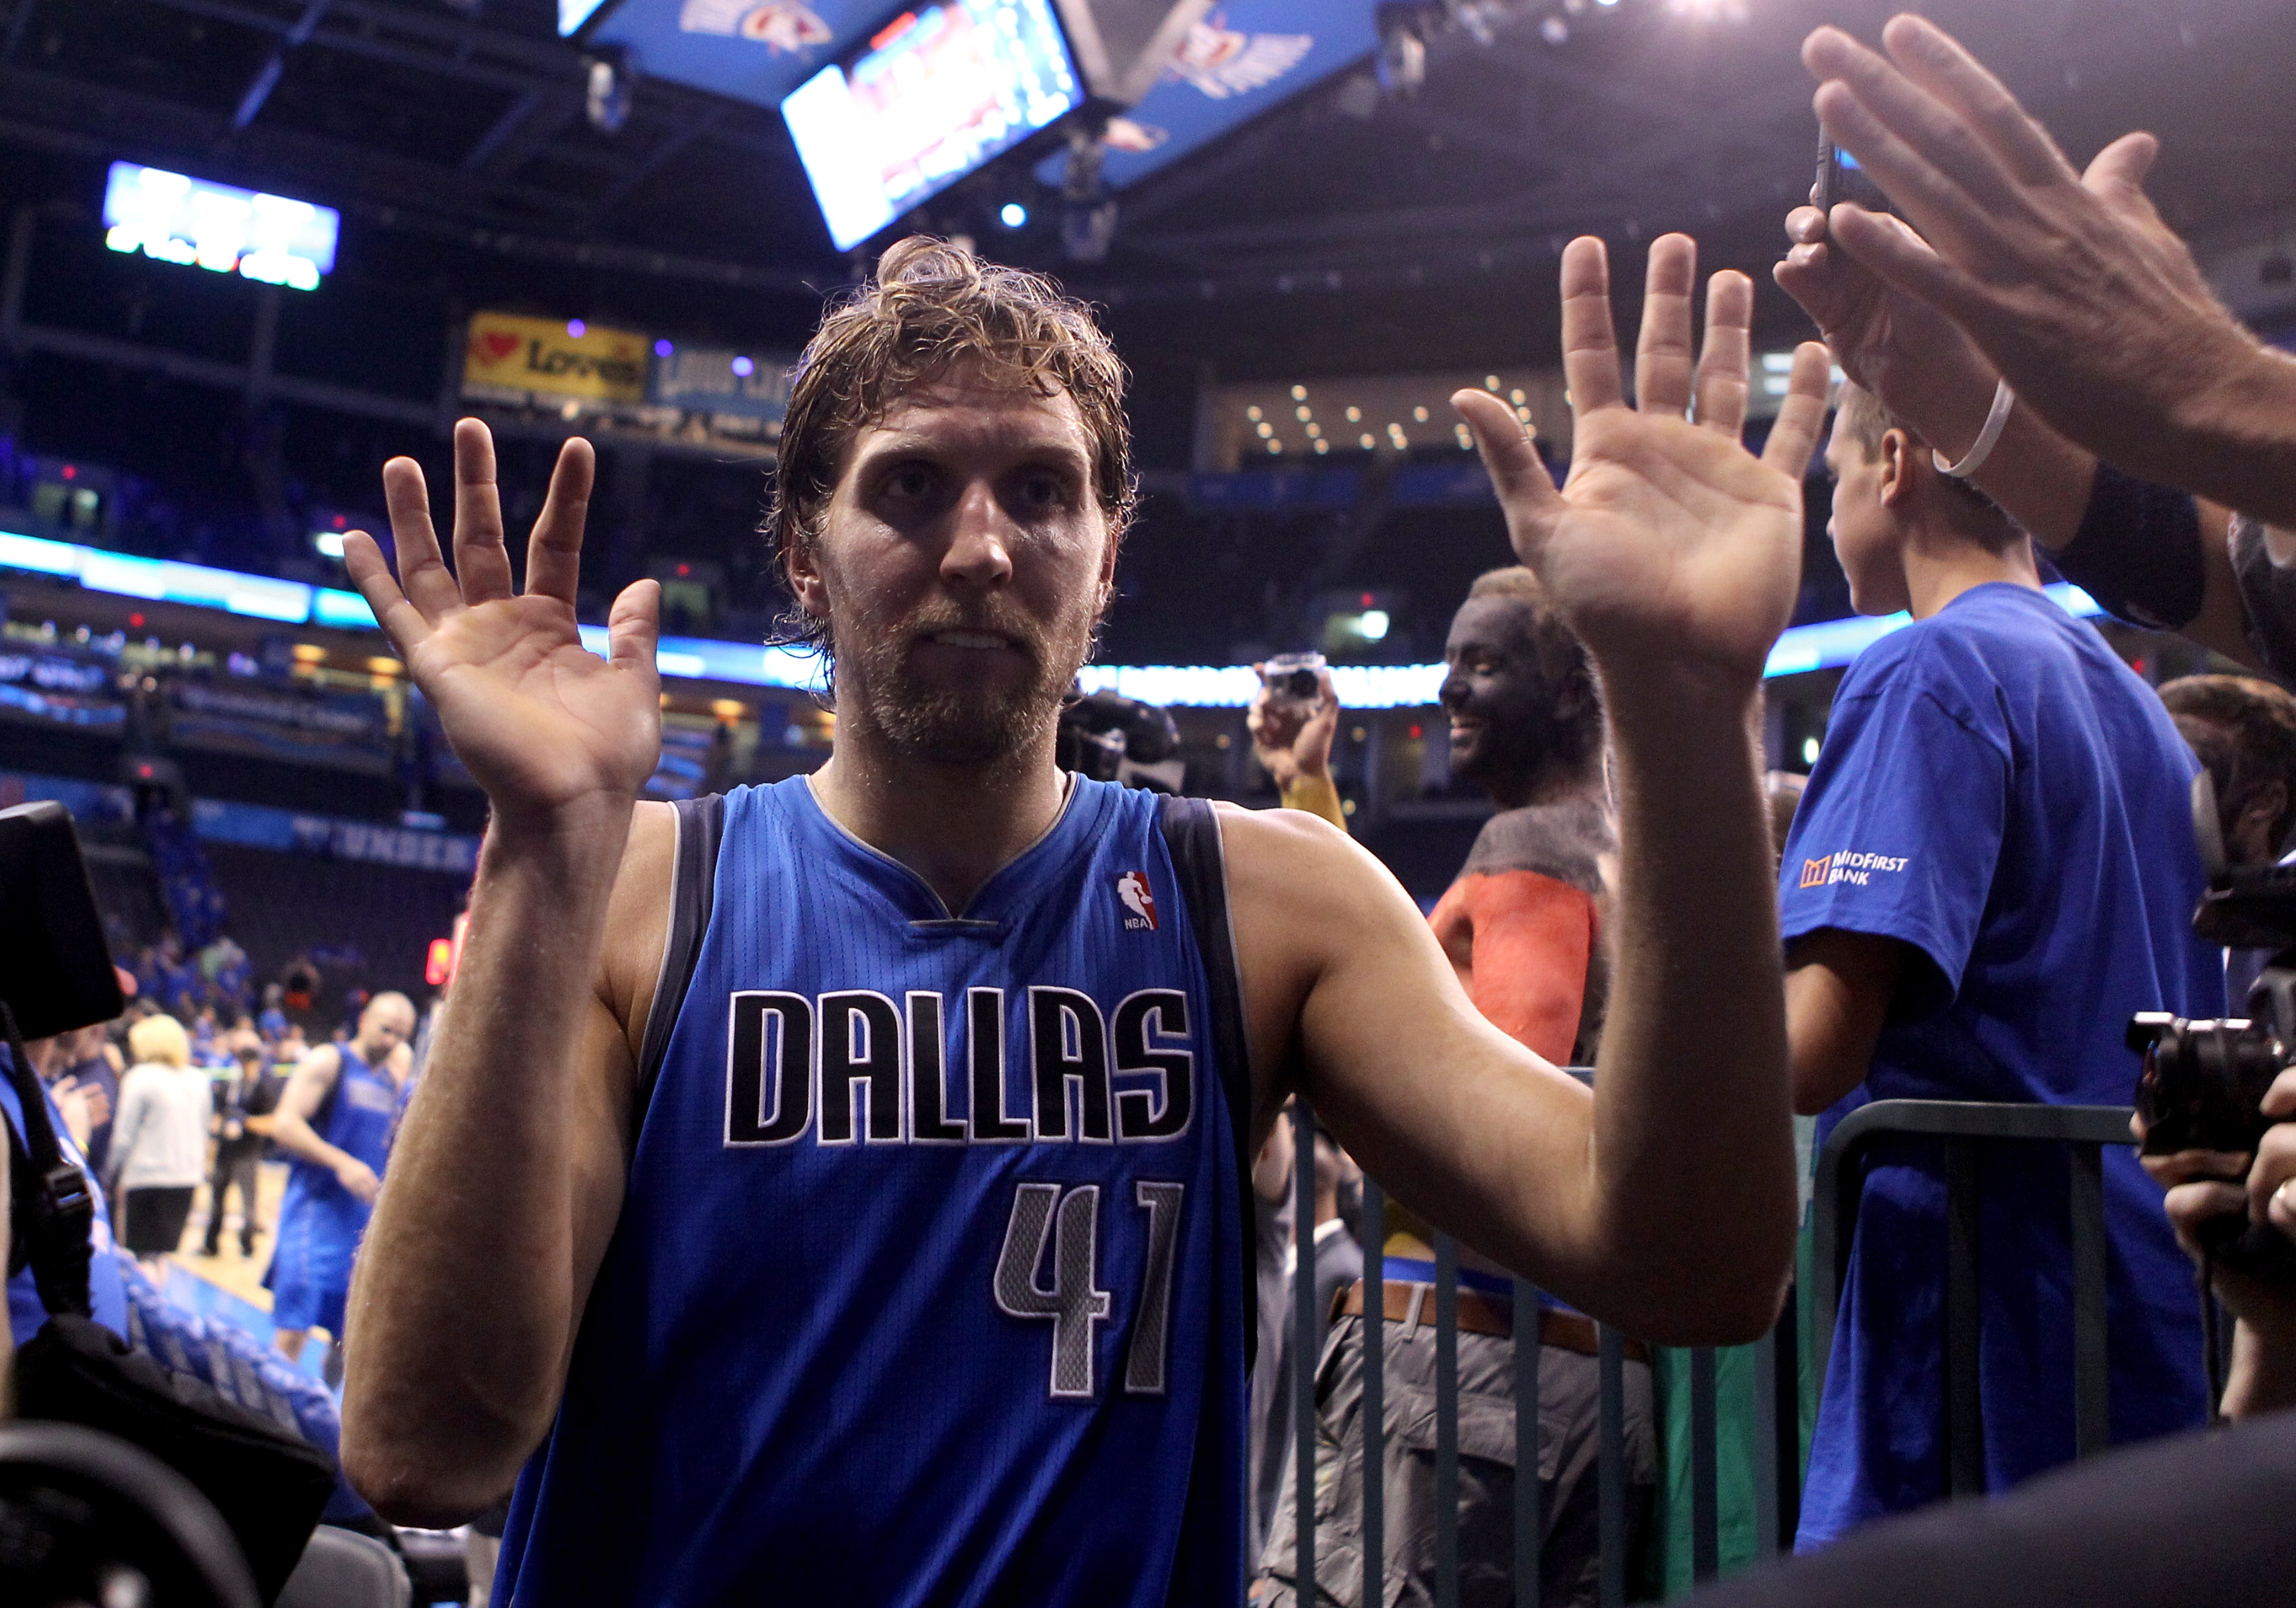 OKLAHOMA CITY, OK - MAY 23:  Dirk Nowitzki #41 of the Dallas Mavericks walks off the court after the Mavericks defeated the Oklahoma City Thunder 112-105 in overtime in Game Four of the Western Conference Finals during the 2011 NBA Playoffs at Oklahoma Ci